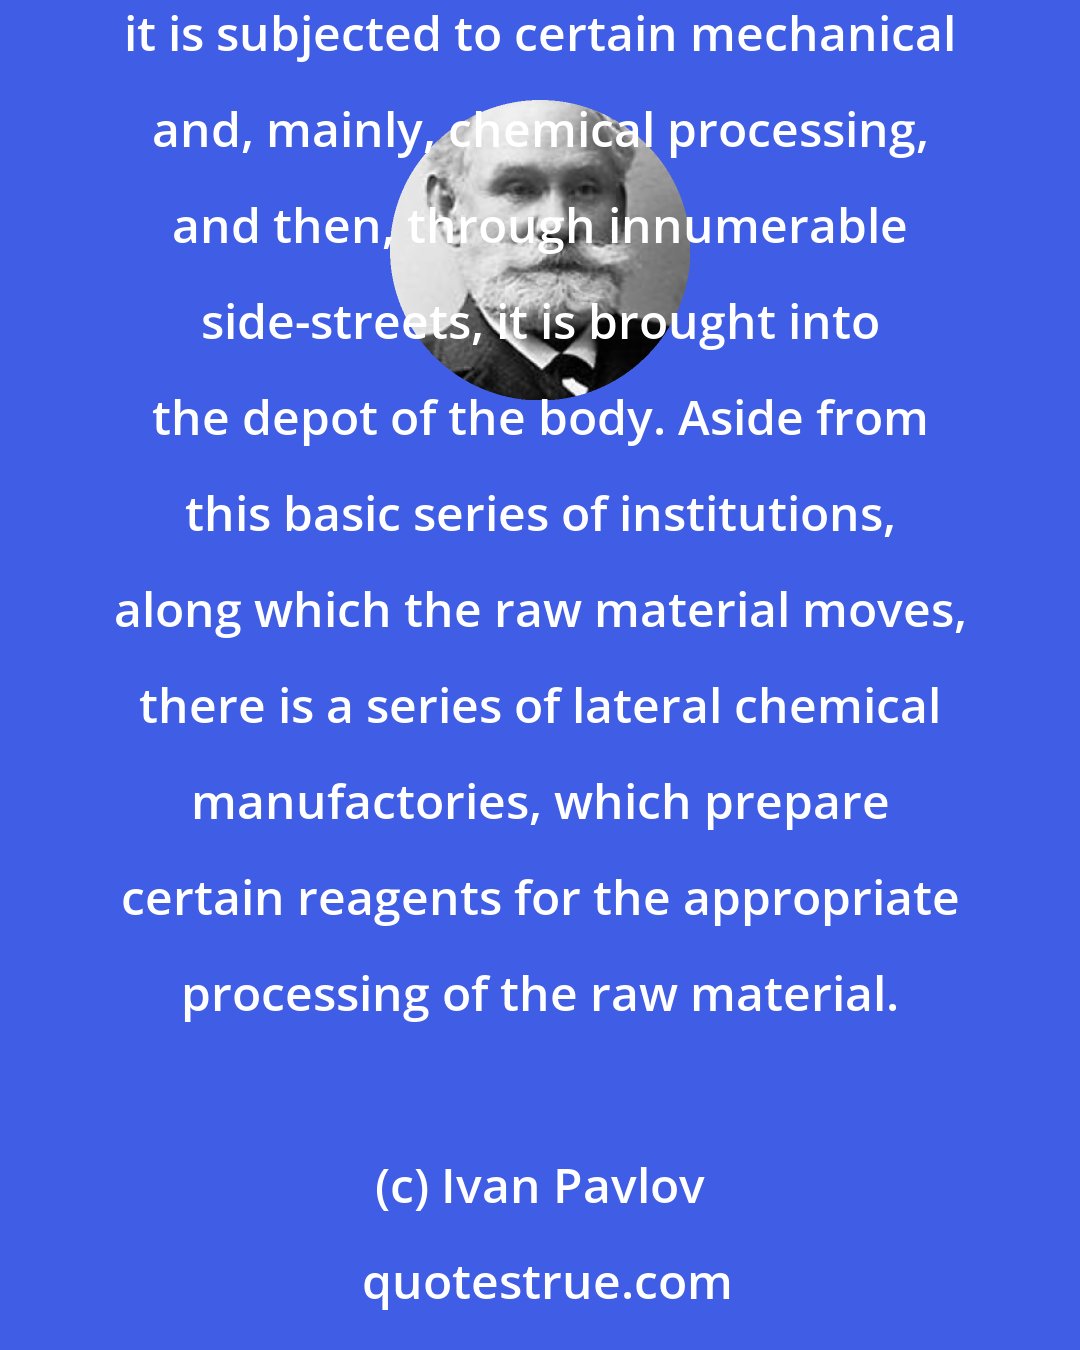 Ivan Pavlov: The digestive canal is in its task a complete chemical factory. The raw material passes through a long series of institutions in which it is subjected to certain mechanical and, mainly, chemical processing, and then, through innumerable side-streets, it is brought into the depot of the body. Aside from this basic series of institutions, along which the raw material moves, there is a series of lateral chemical manufactories, which prepare certain reagents for the appropriate processing of the raw material.